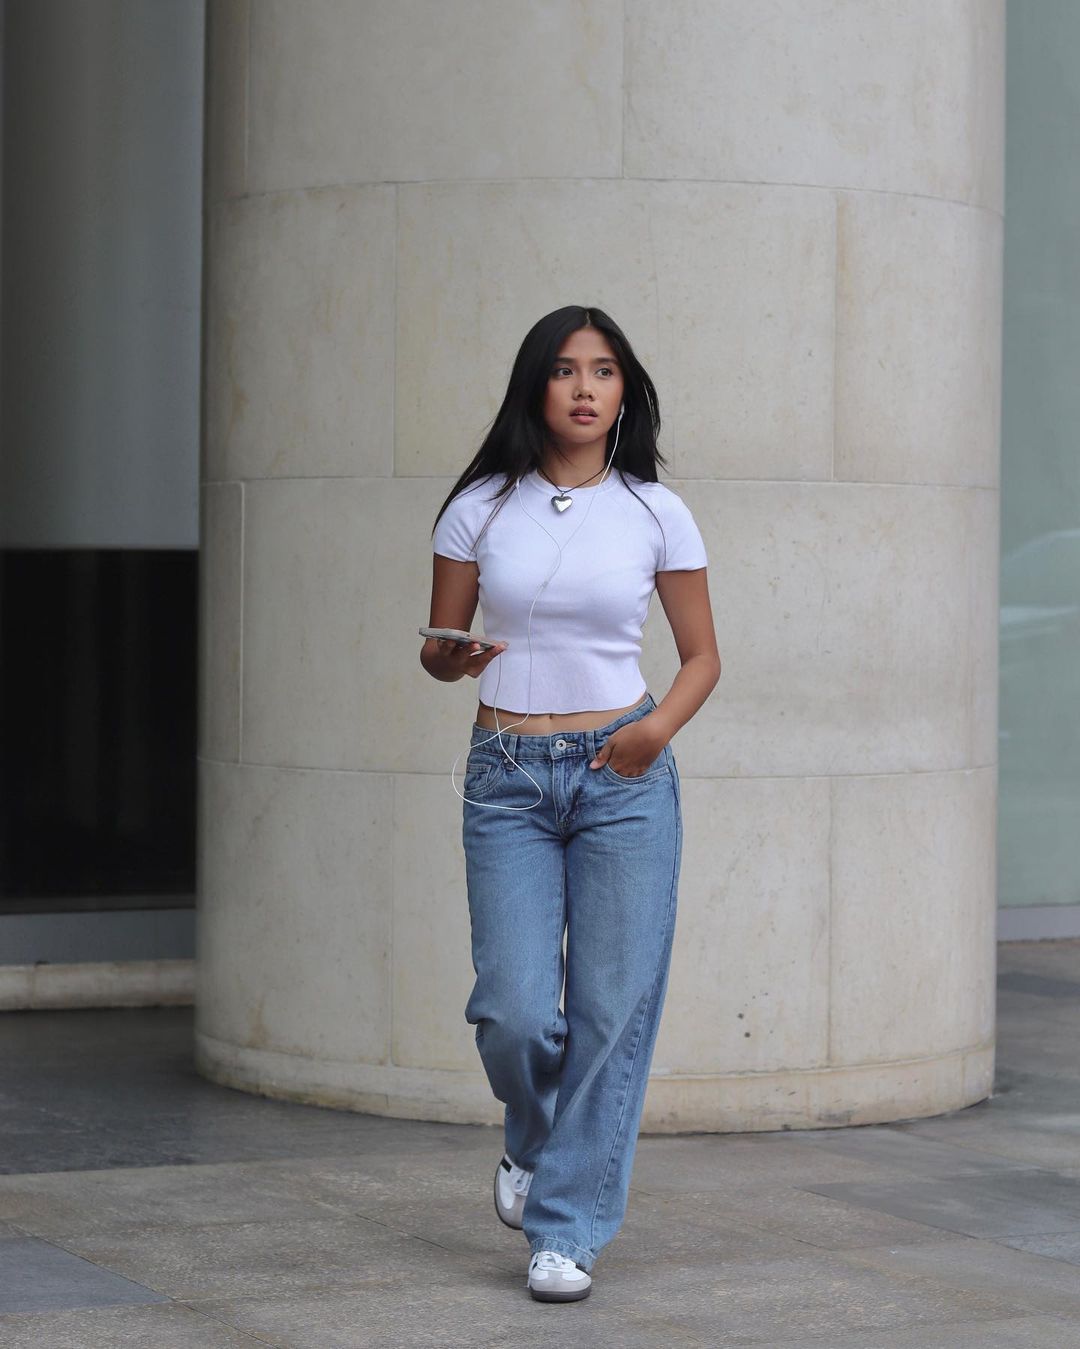 25 Ways to Style Baggy Jeans With Everything, From Blazers to Crop Tops   Straight leg jeans outfits, White shirt and jeans, White shirt outfits